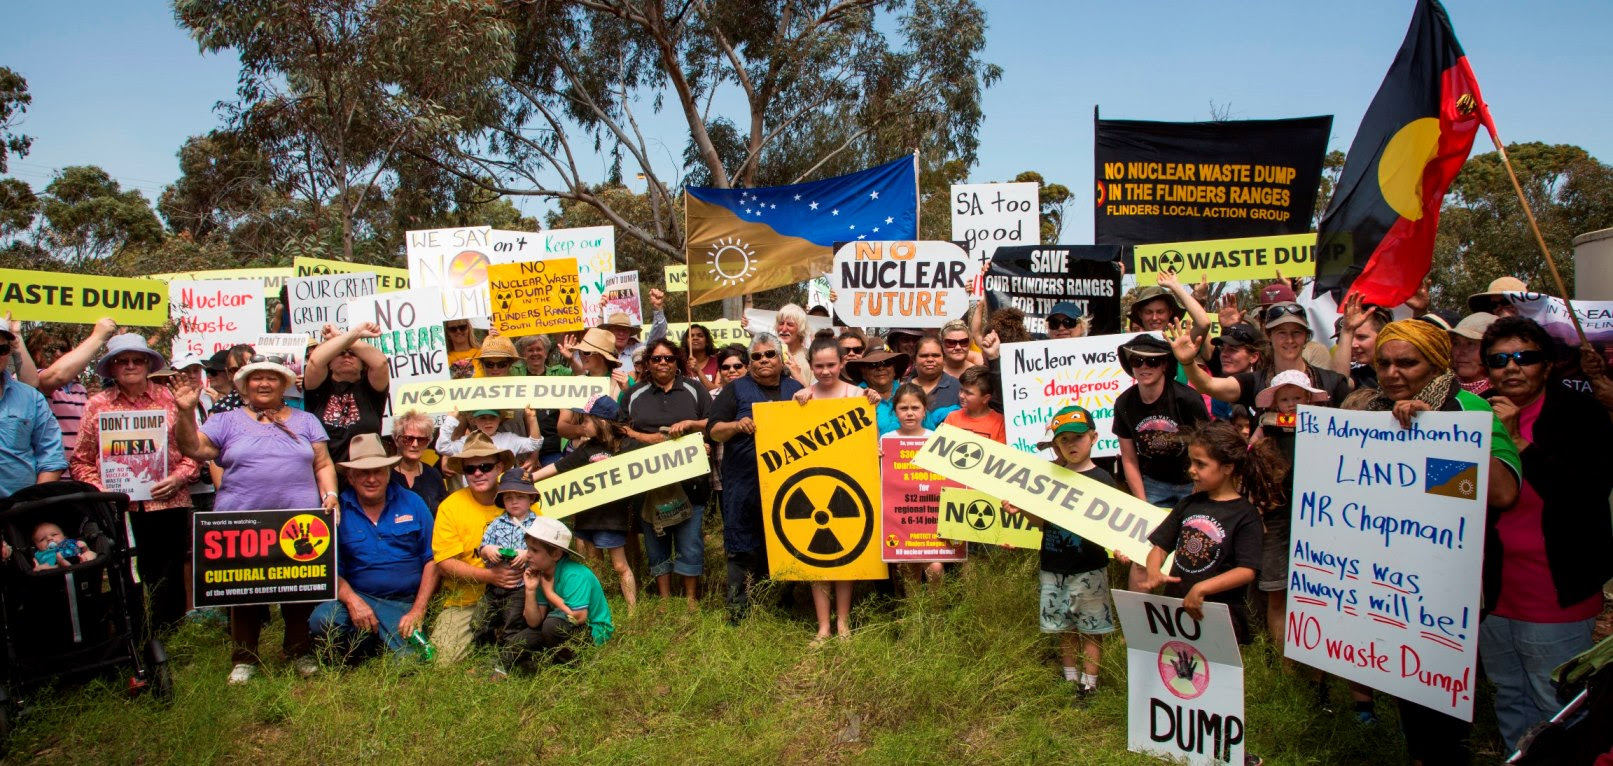 A large crowd of people of all ages outside, in front of a gum tree, holding protest signs that read "No dump", "Danger", "No Cultural genocide", "No nuclear future", "It's Adnyamathanha land Mr Chapman - always was, always will be - No waste dump". There is a Adnyamathanha flag being held up in the centre and an Aboriginal flag held on the right.